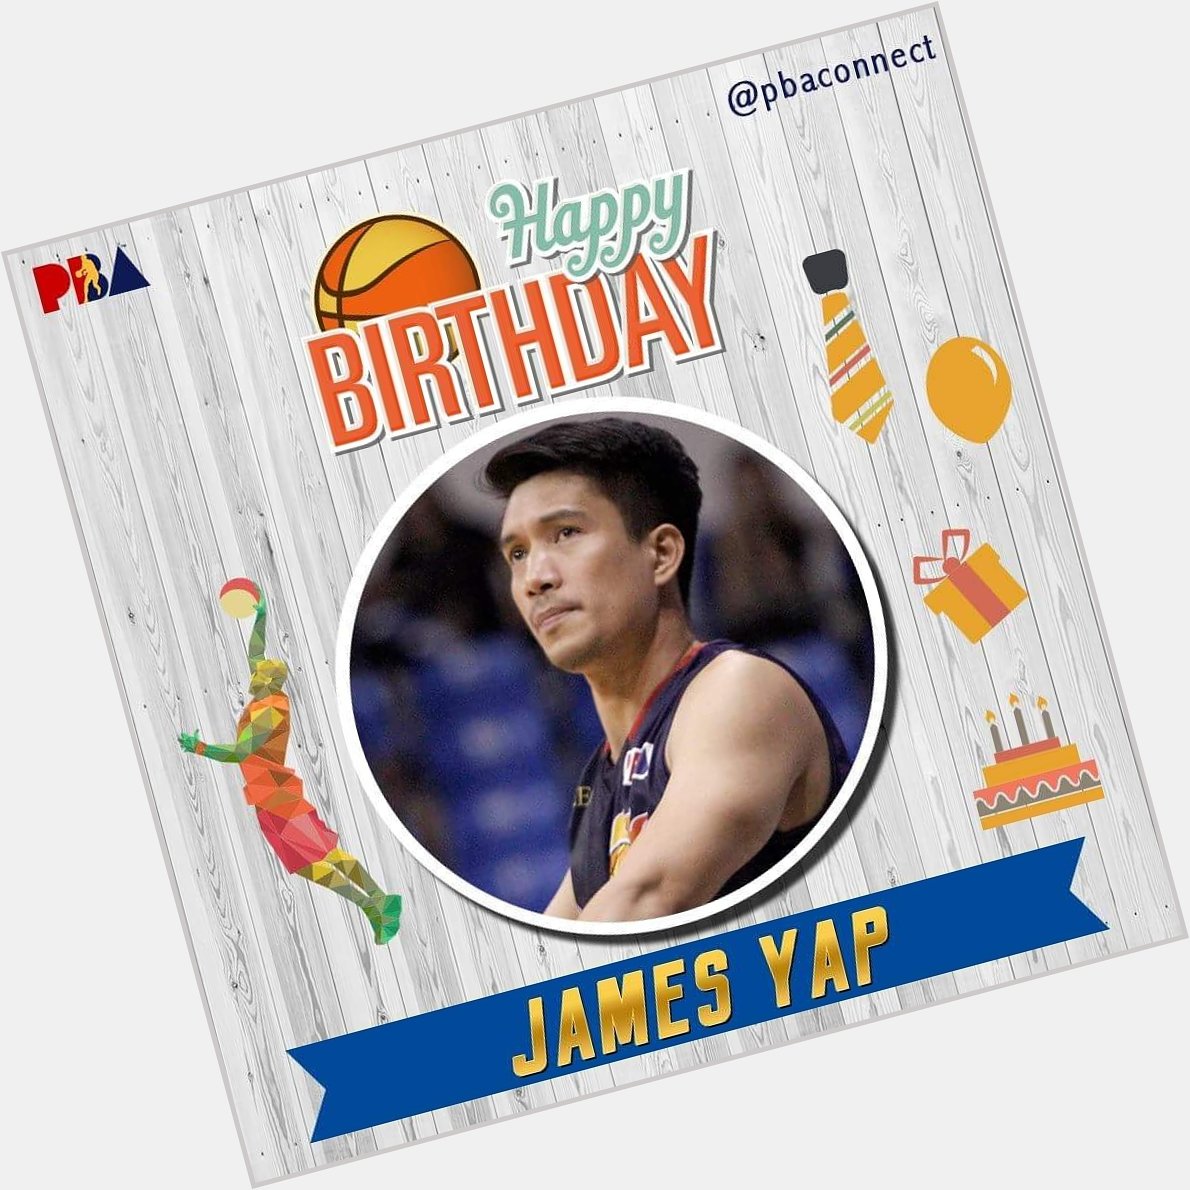 Happy Birthday  Babe James  Yap!  Stay handsome and 3point shooter    